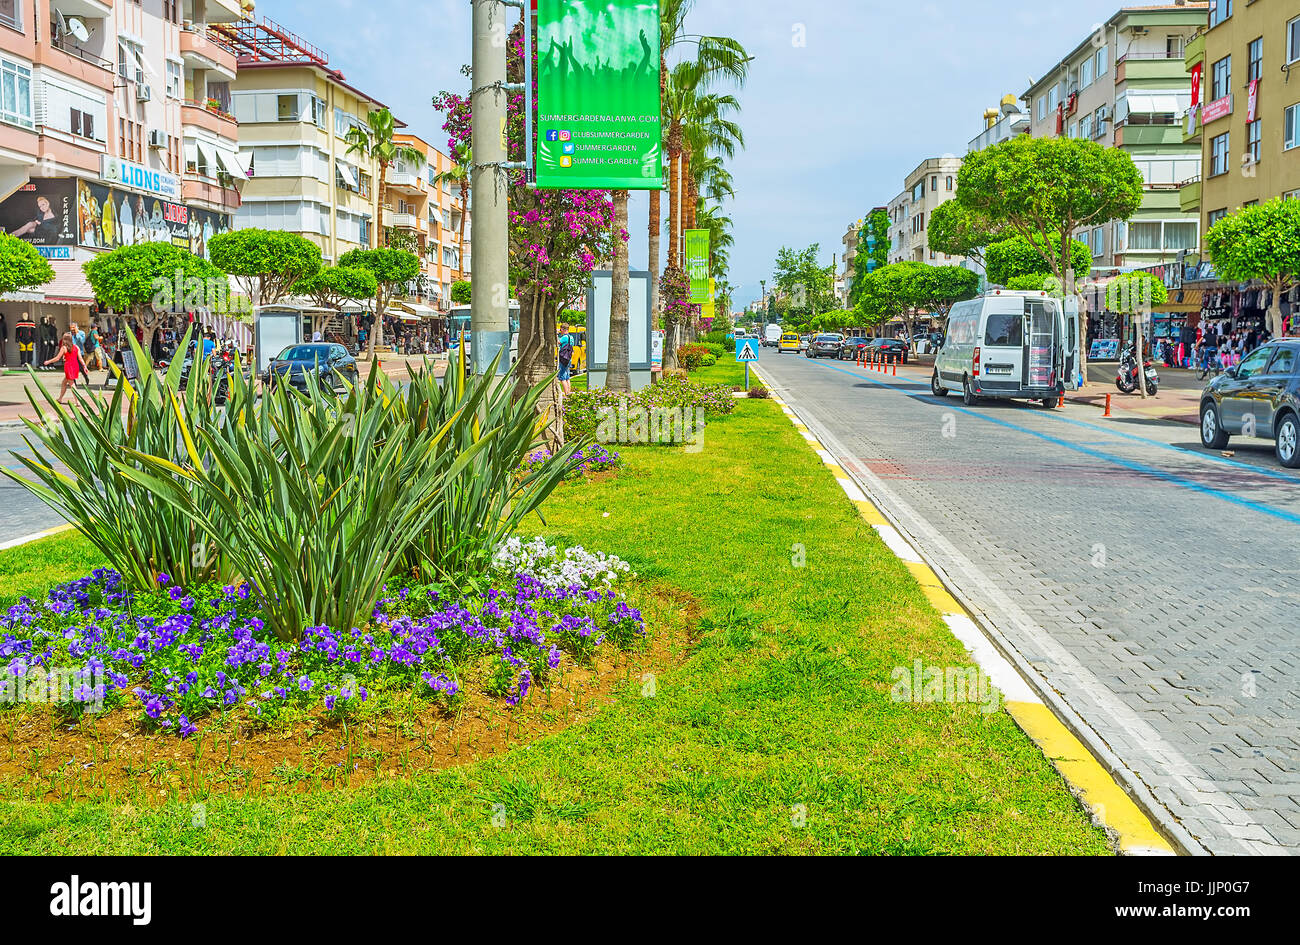 ALANYA, TURKEY - MAY 9, 2017: The Ataturk Boulevard is decorated with scenic flower beds, numerous trees and blooming bushes, on May 9 in Alanya. Stock Photo